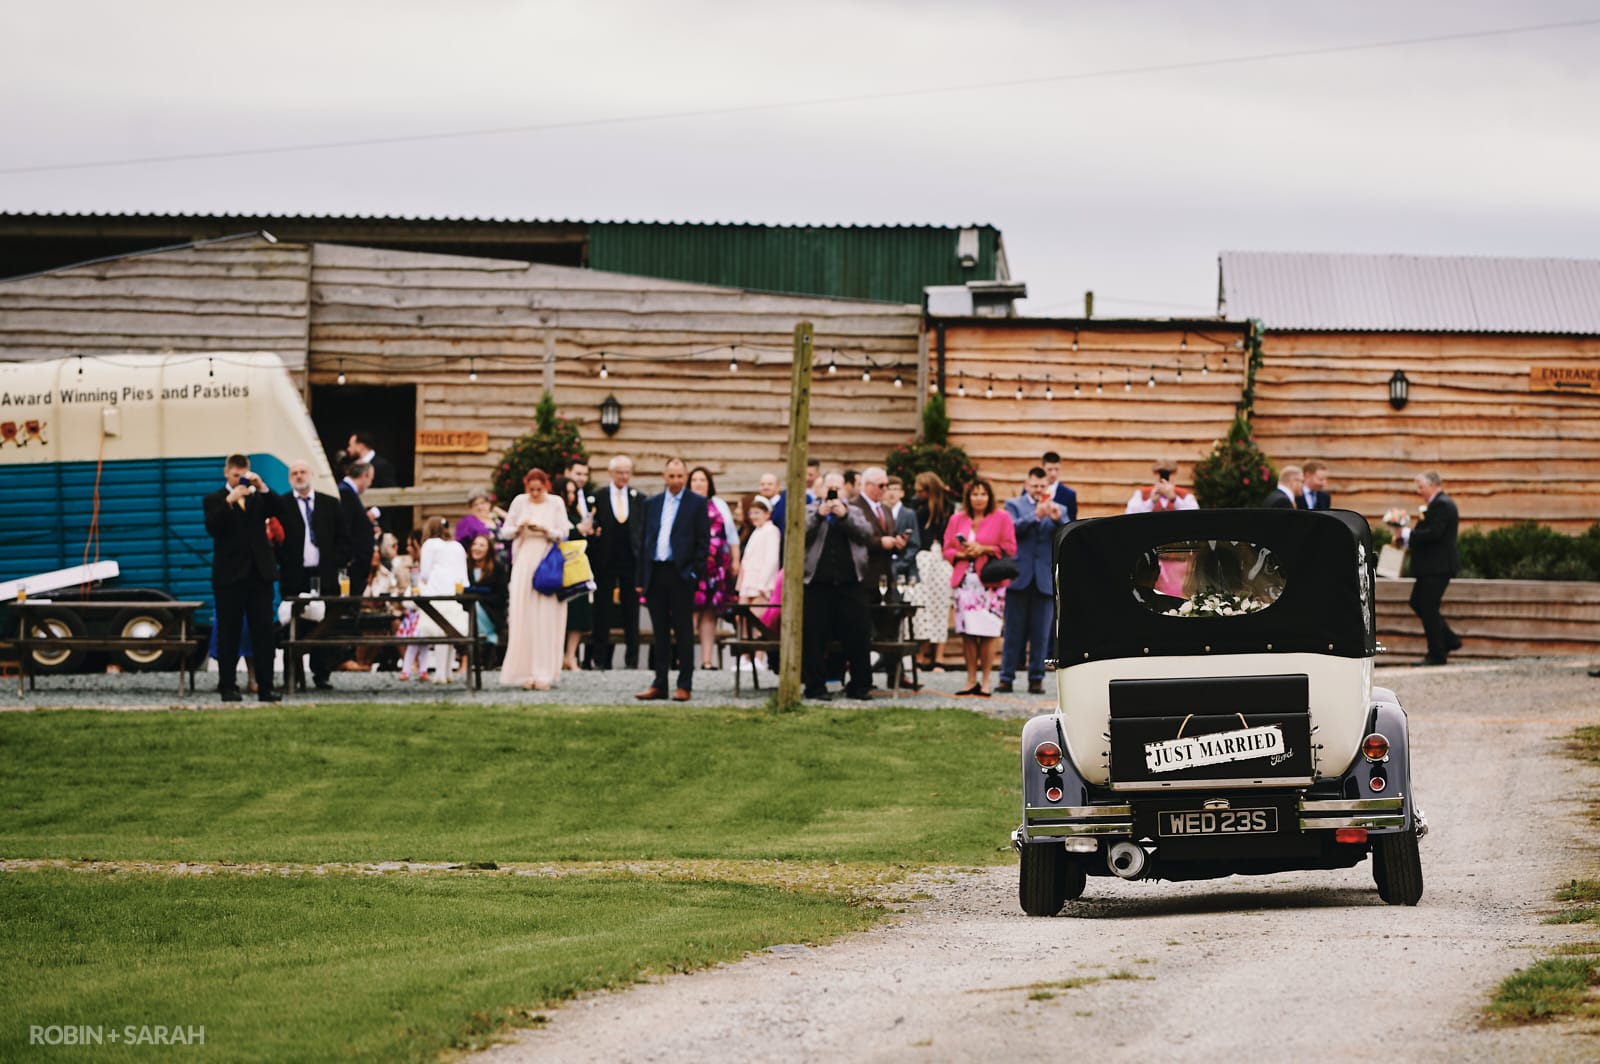 Wedding car arrives at The Barn at Dinthill